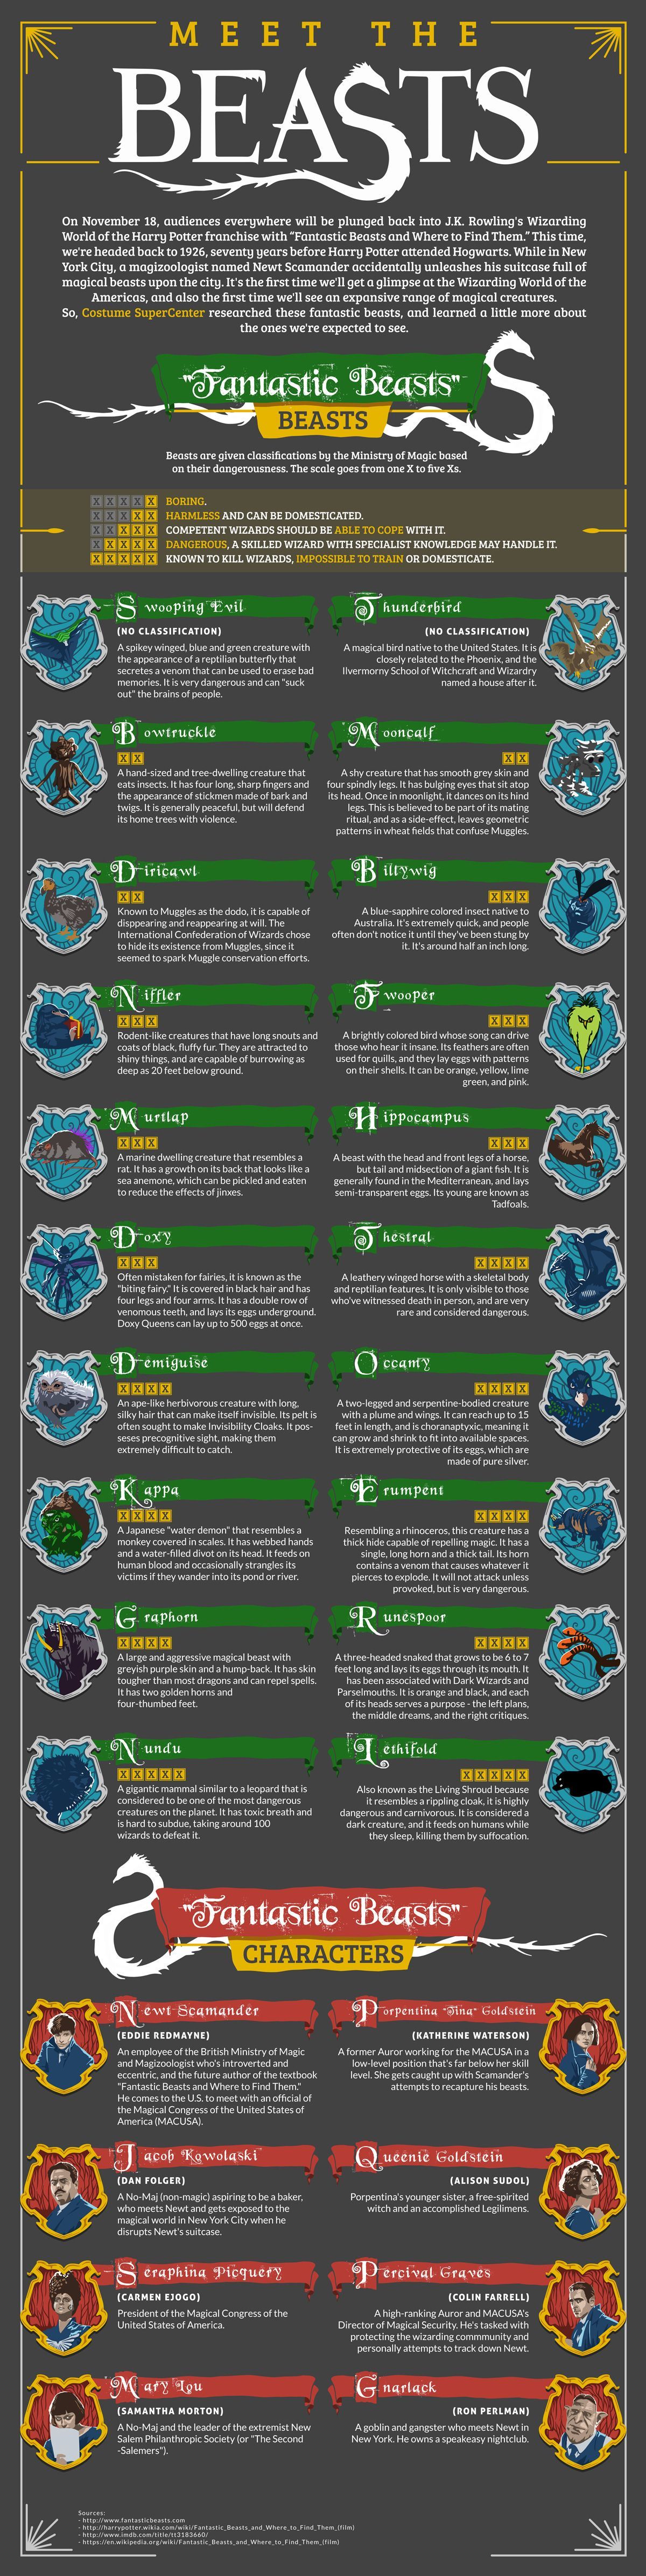 Fantastic Beasts and Where To Find Them: Meet the Beasts Infographic New Fantasy S